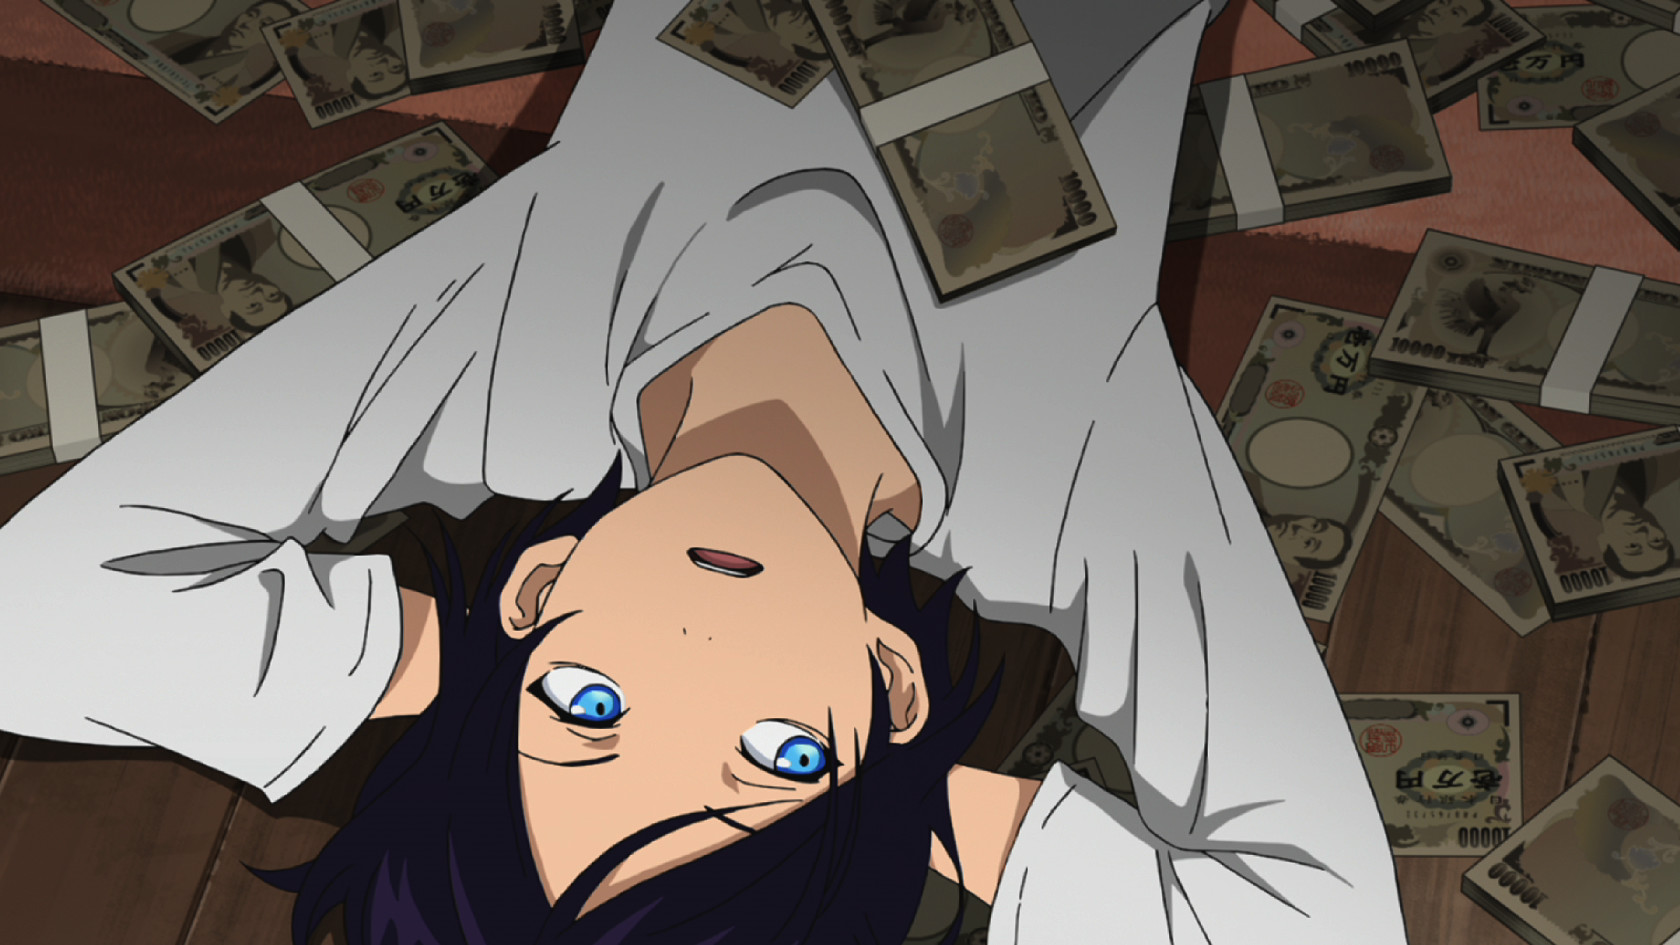 Watch Noragami Season 2 Episode 19 Sub Dub Anime Simulcast Funimation Yato and yukine have finally mended their relationship as god and regalia, and. watch noragami season 2 episode 19 sub